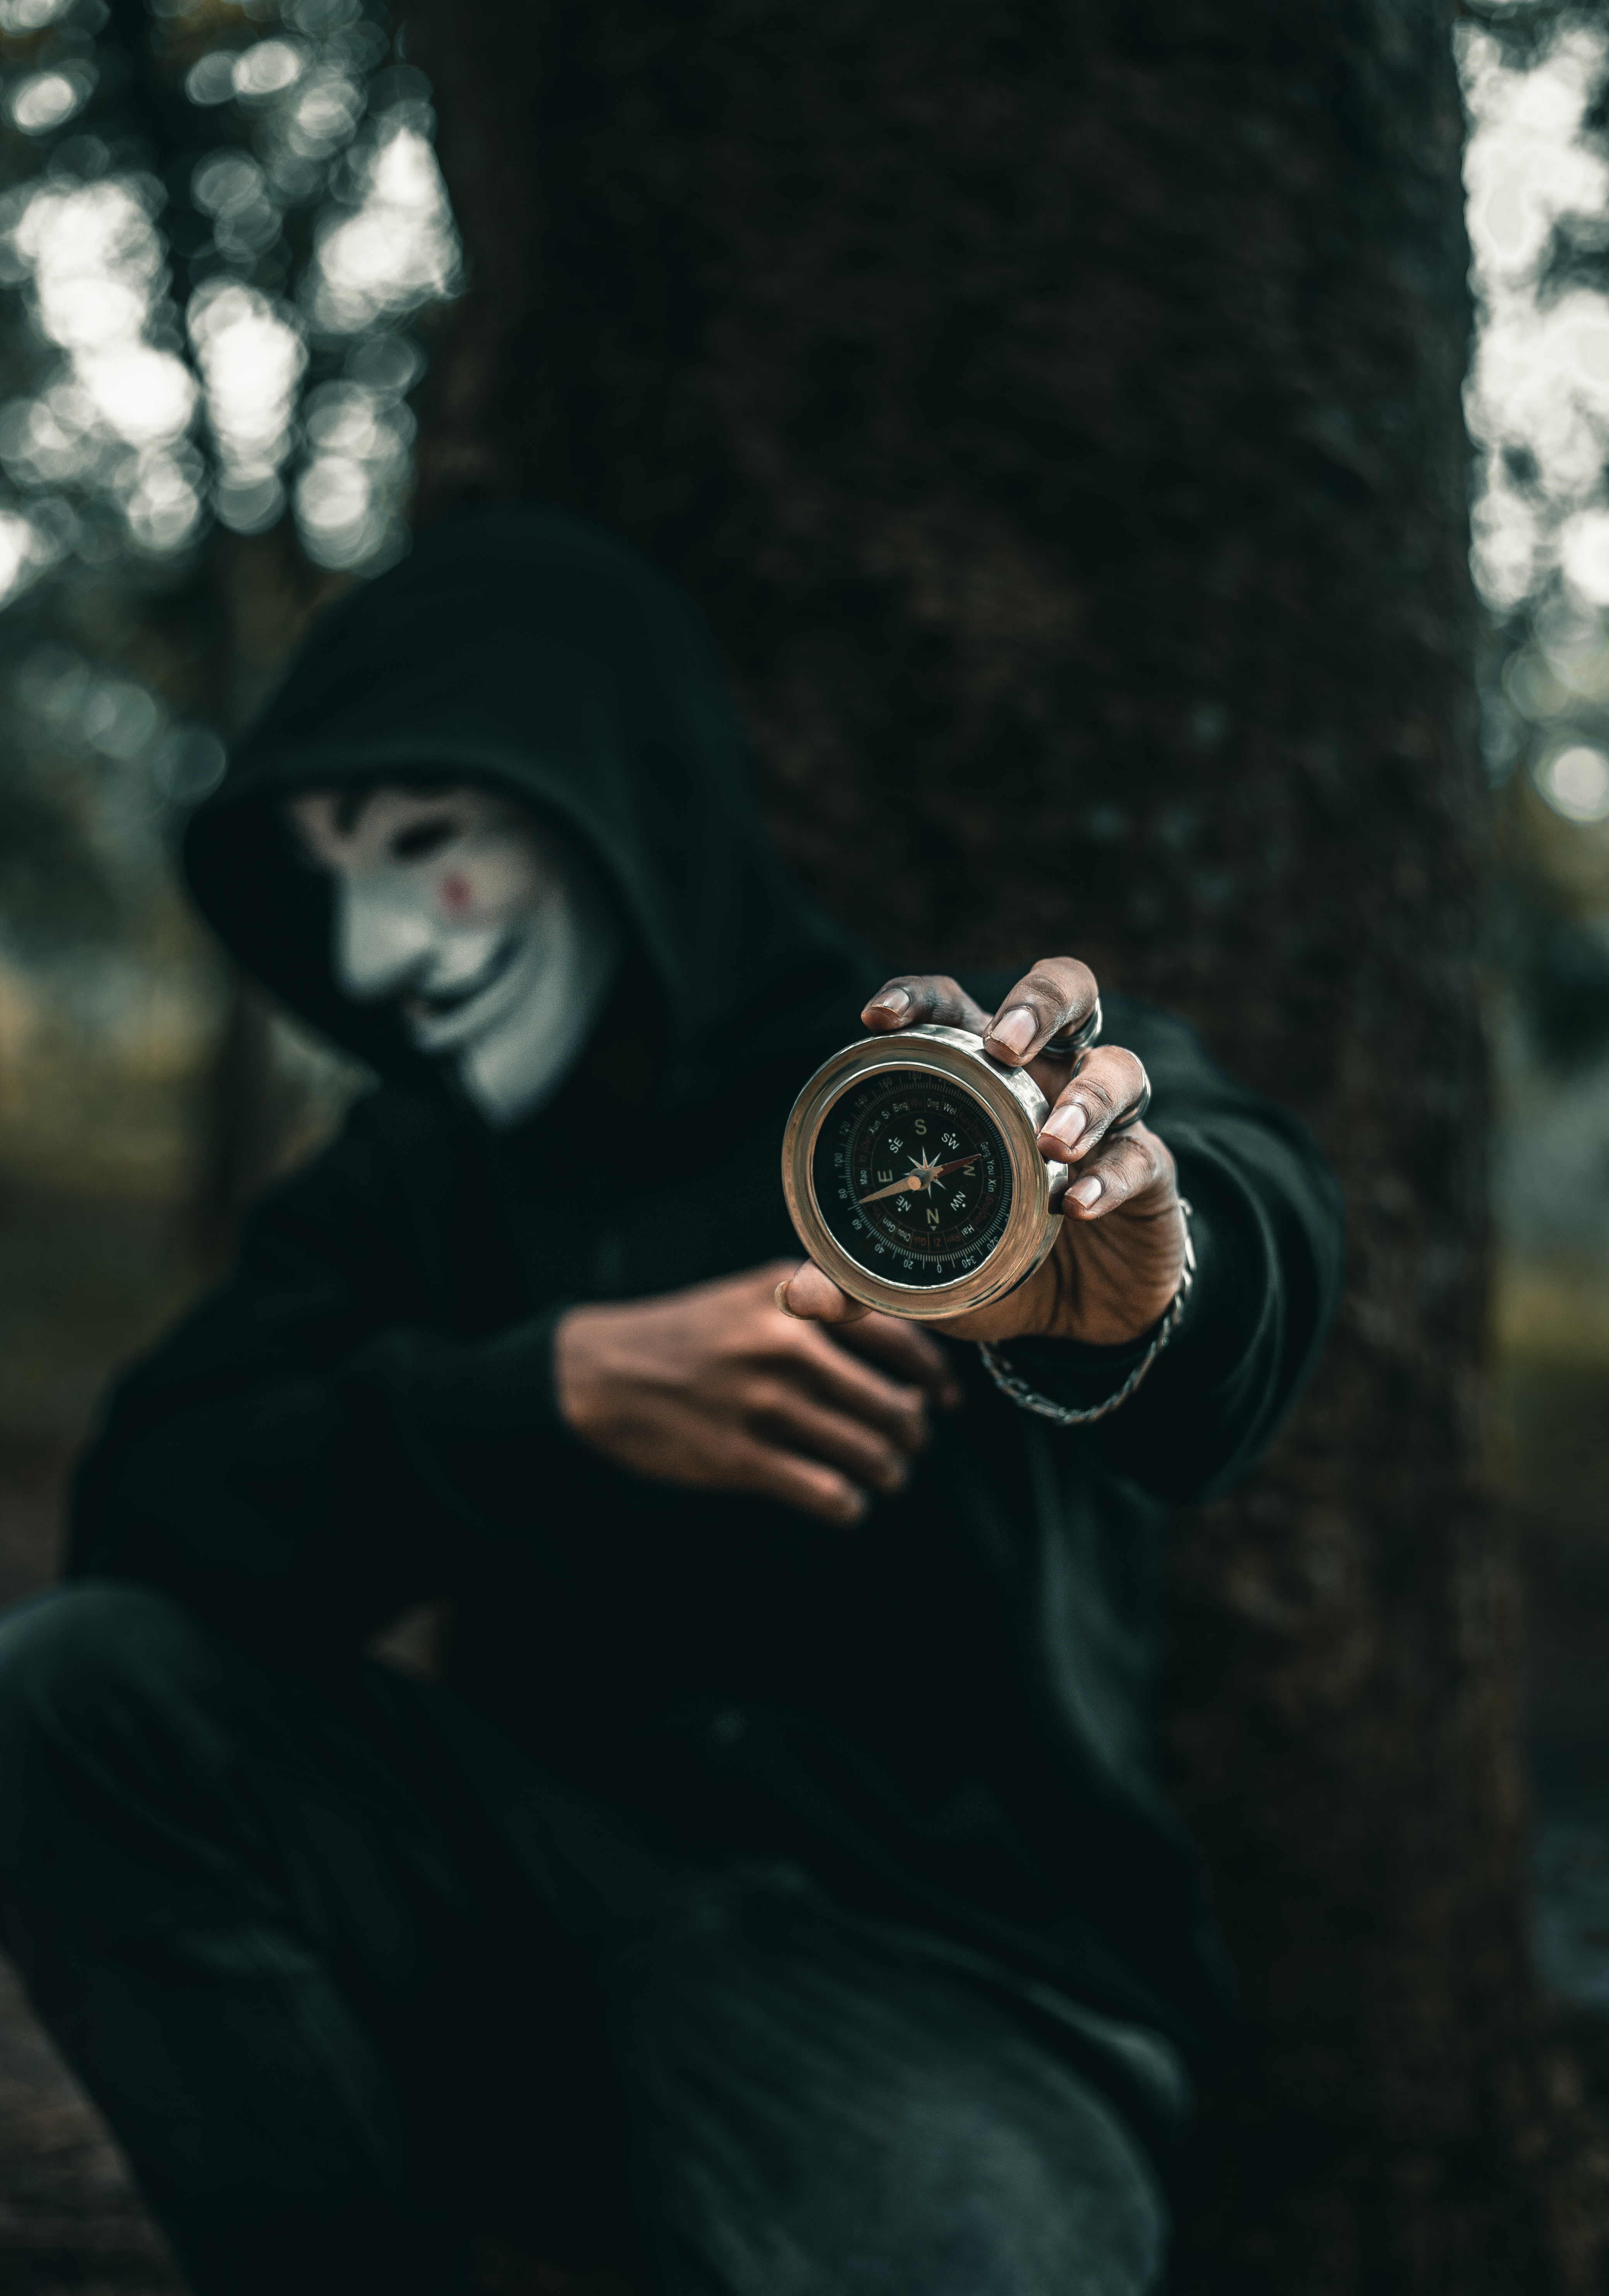 66909 download wallpaper compass, anonymous, miscellanea, miscellaneous, mask, human, person, hood screensavers and pictures for free